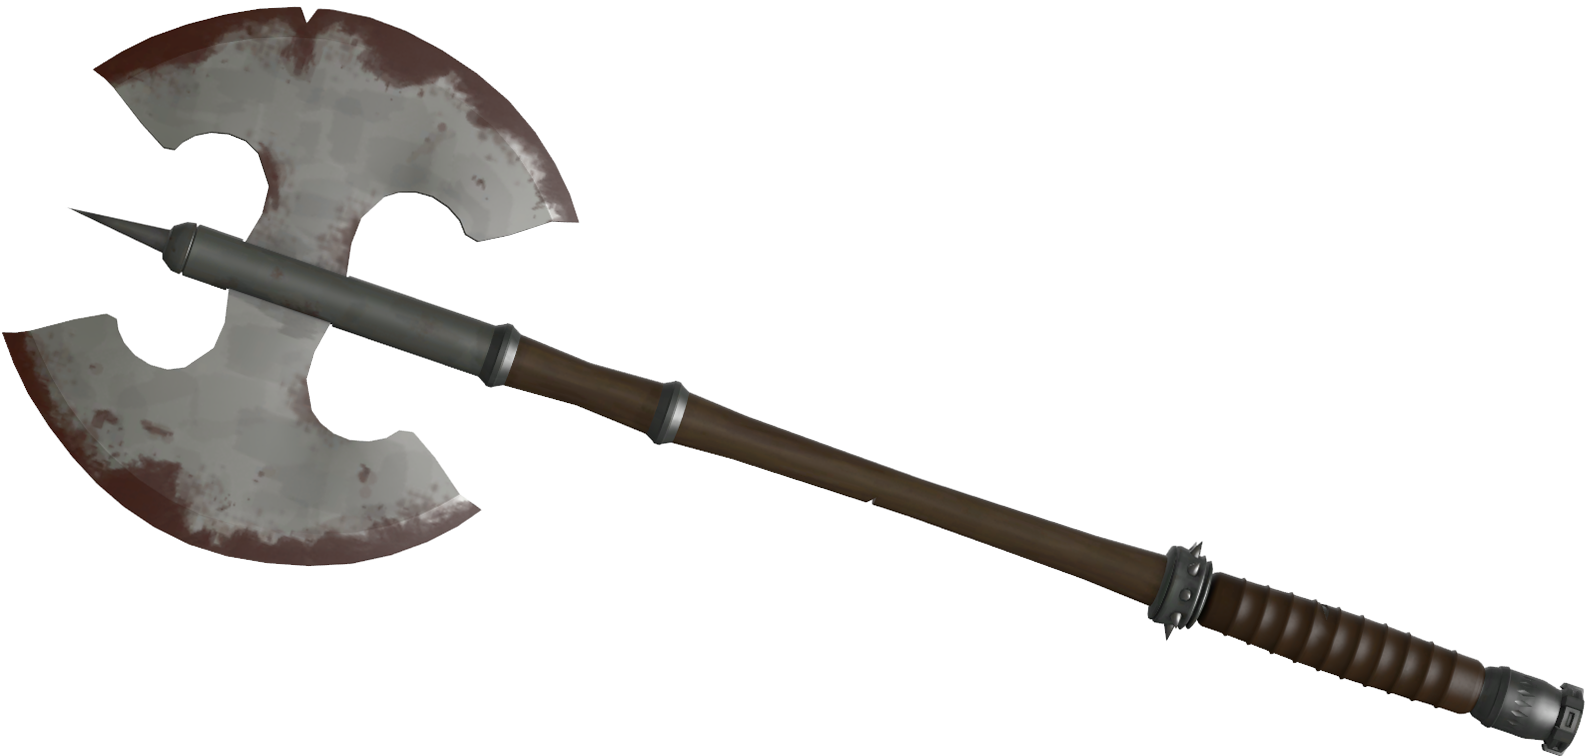 Weapon Png Transparent Image - Weapons Png , HD Wallpaper & Backgrounds